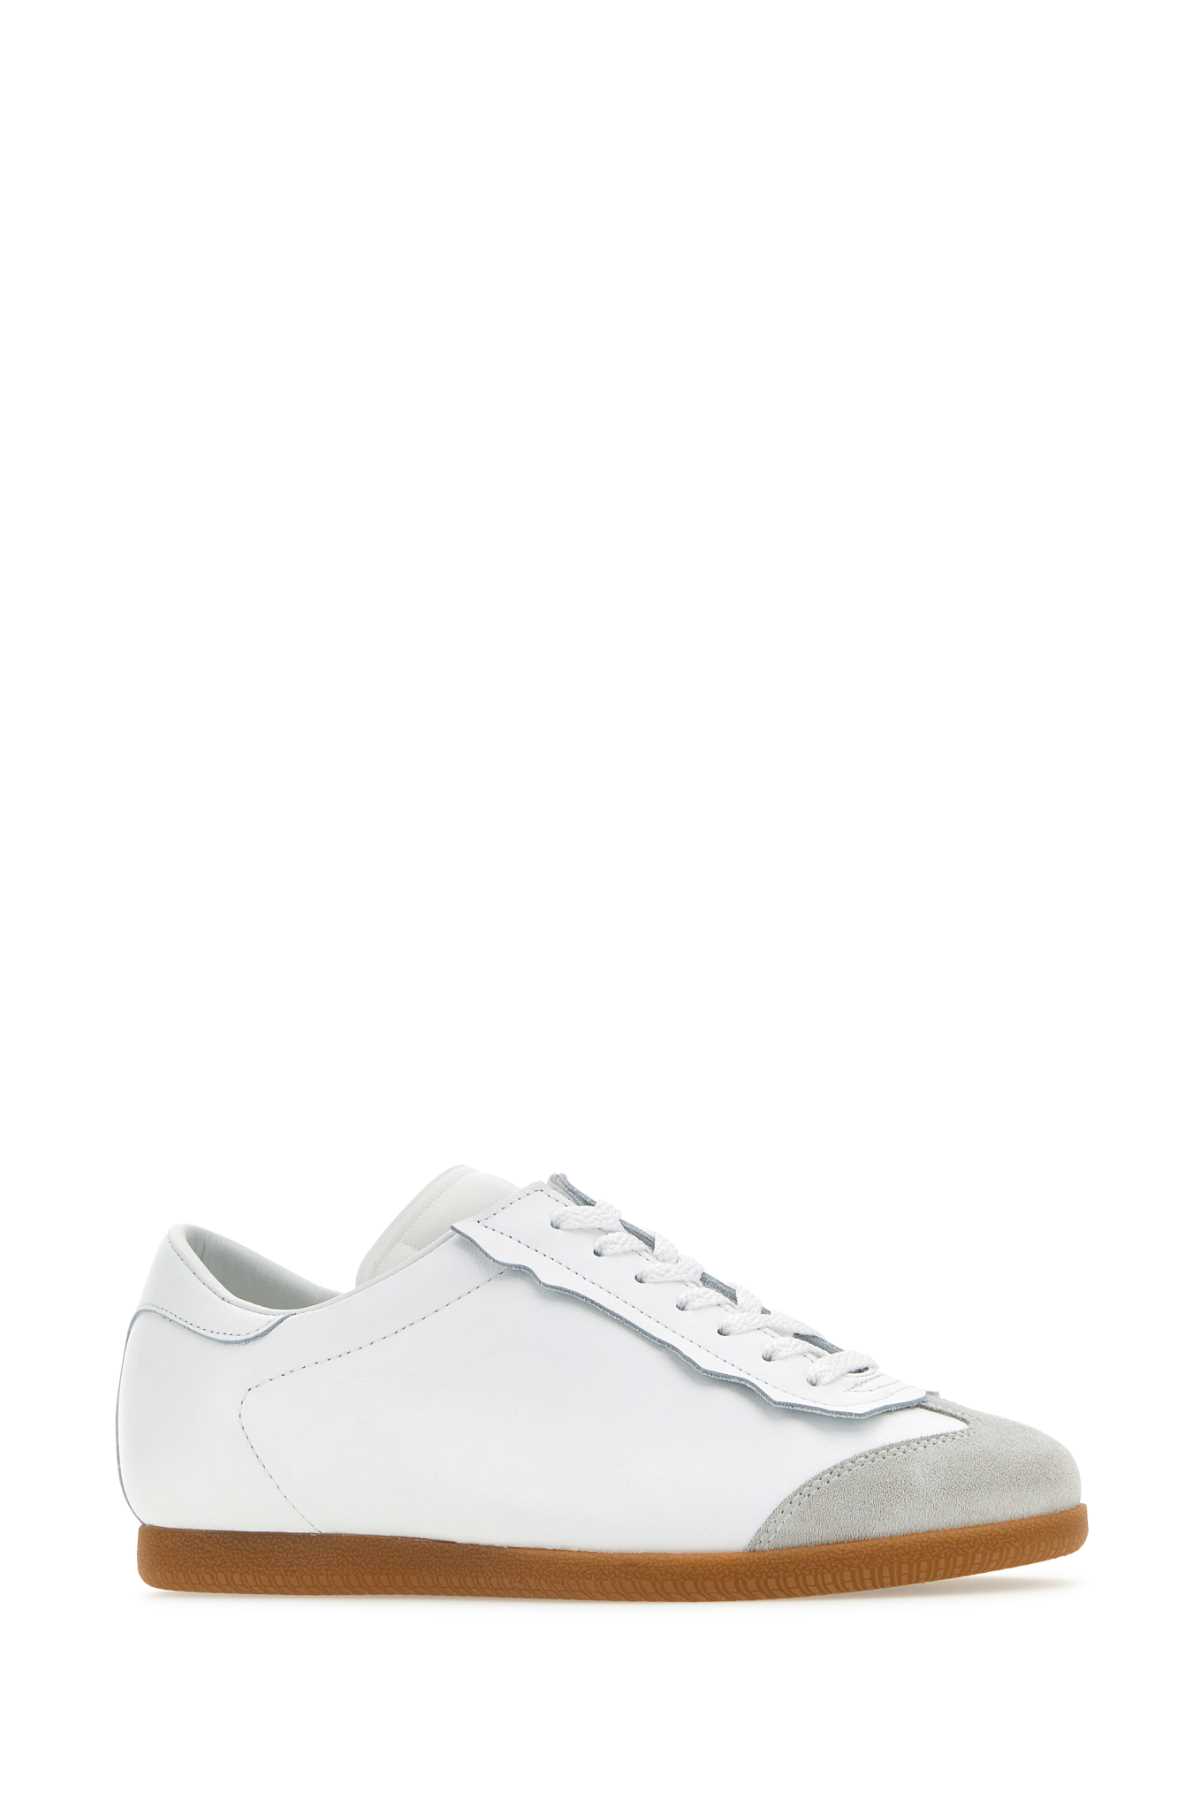 Shop Maison Margiela White Leather Featherlight Sneakers In T1003